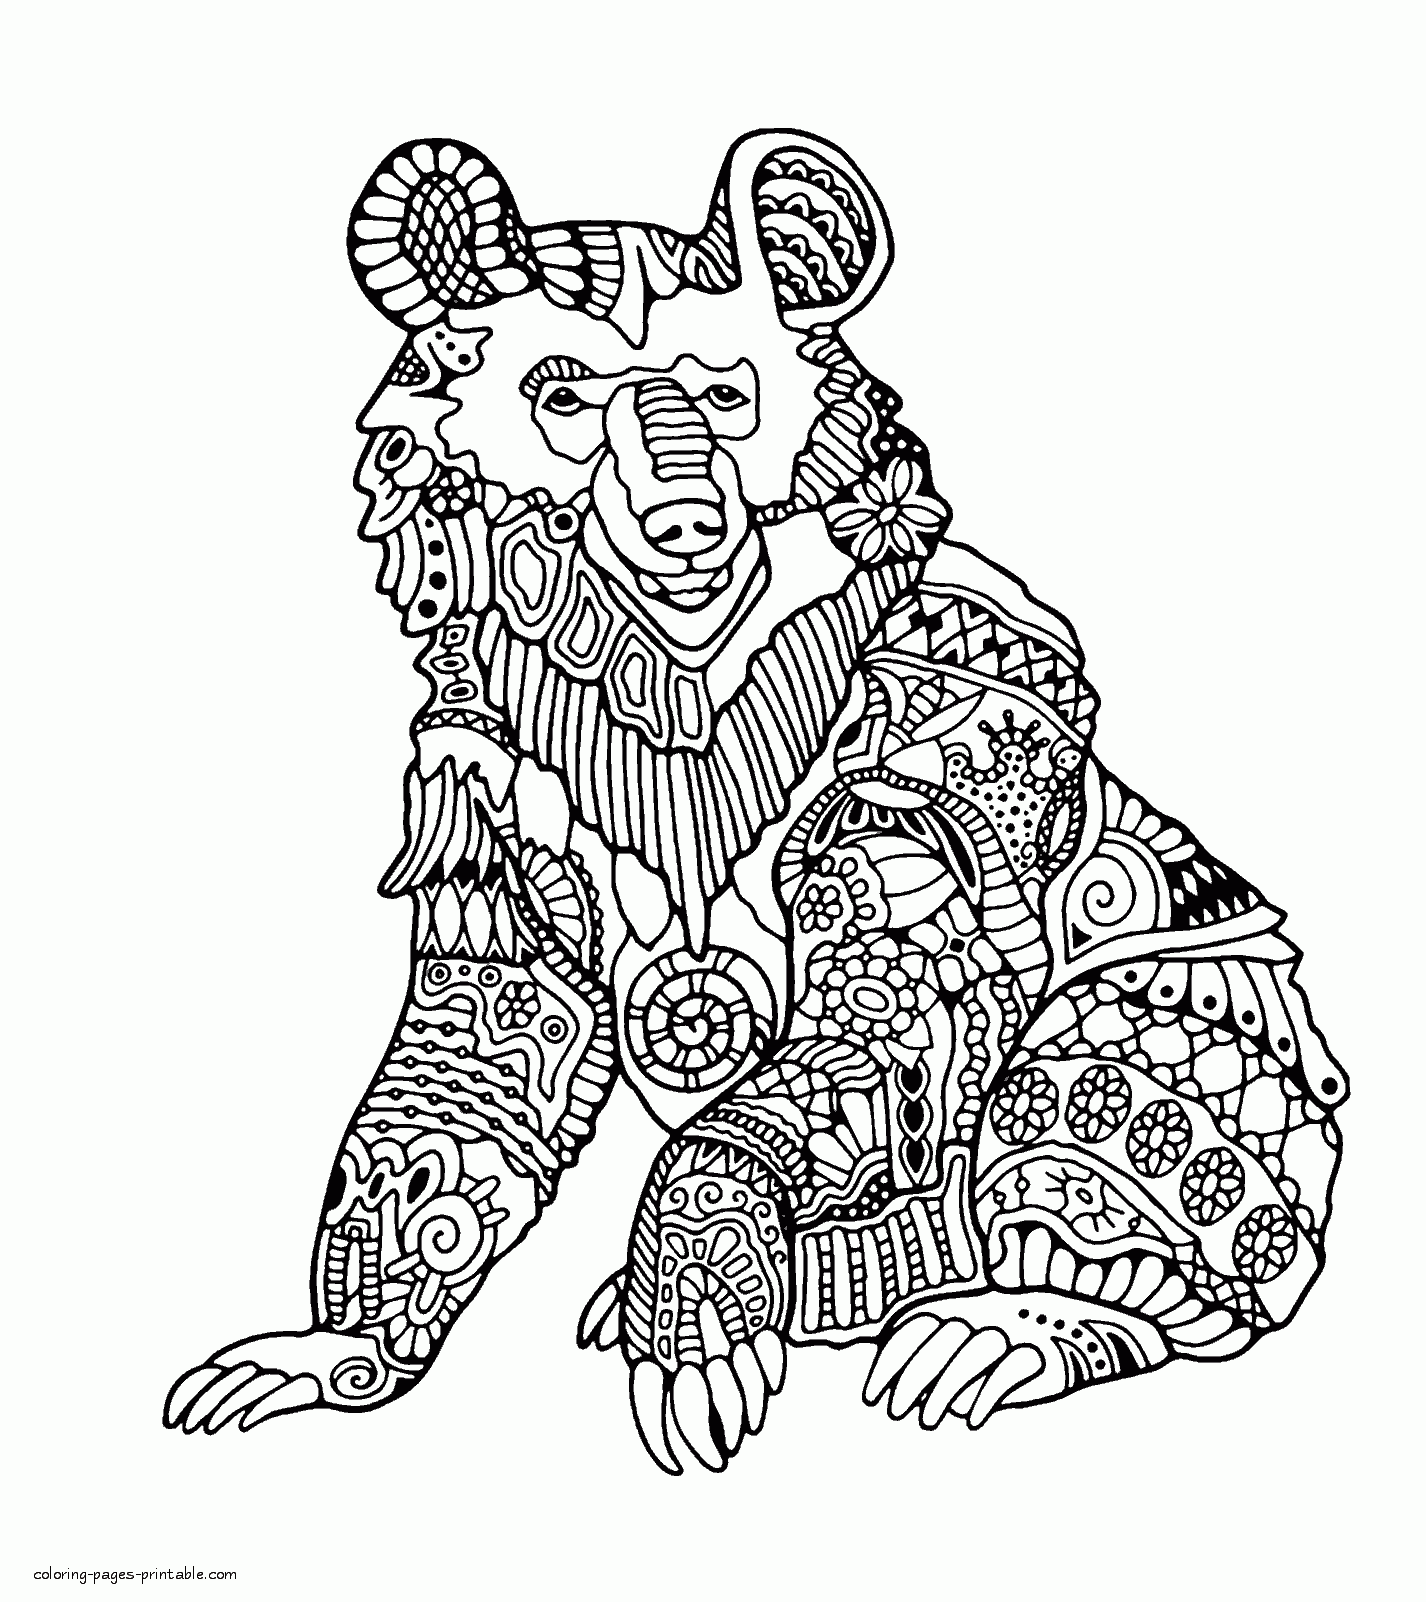 hard-animal-coloring-pages-for-adults-printable-printable-coloring